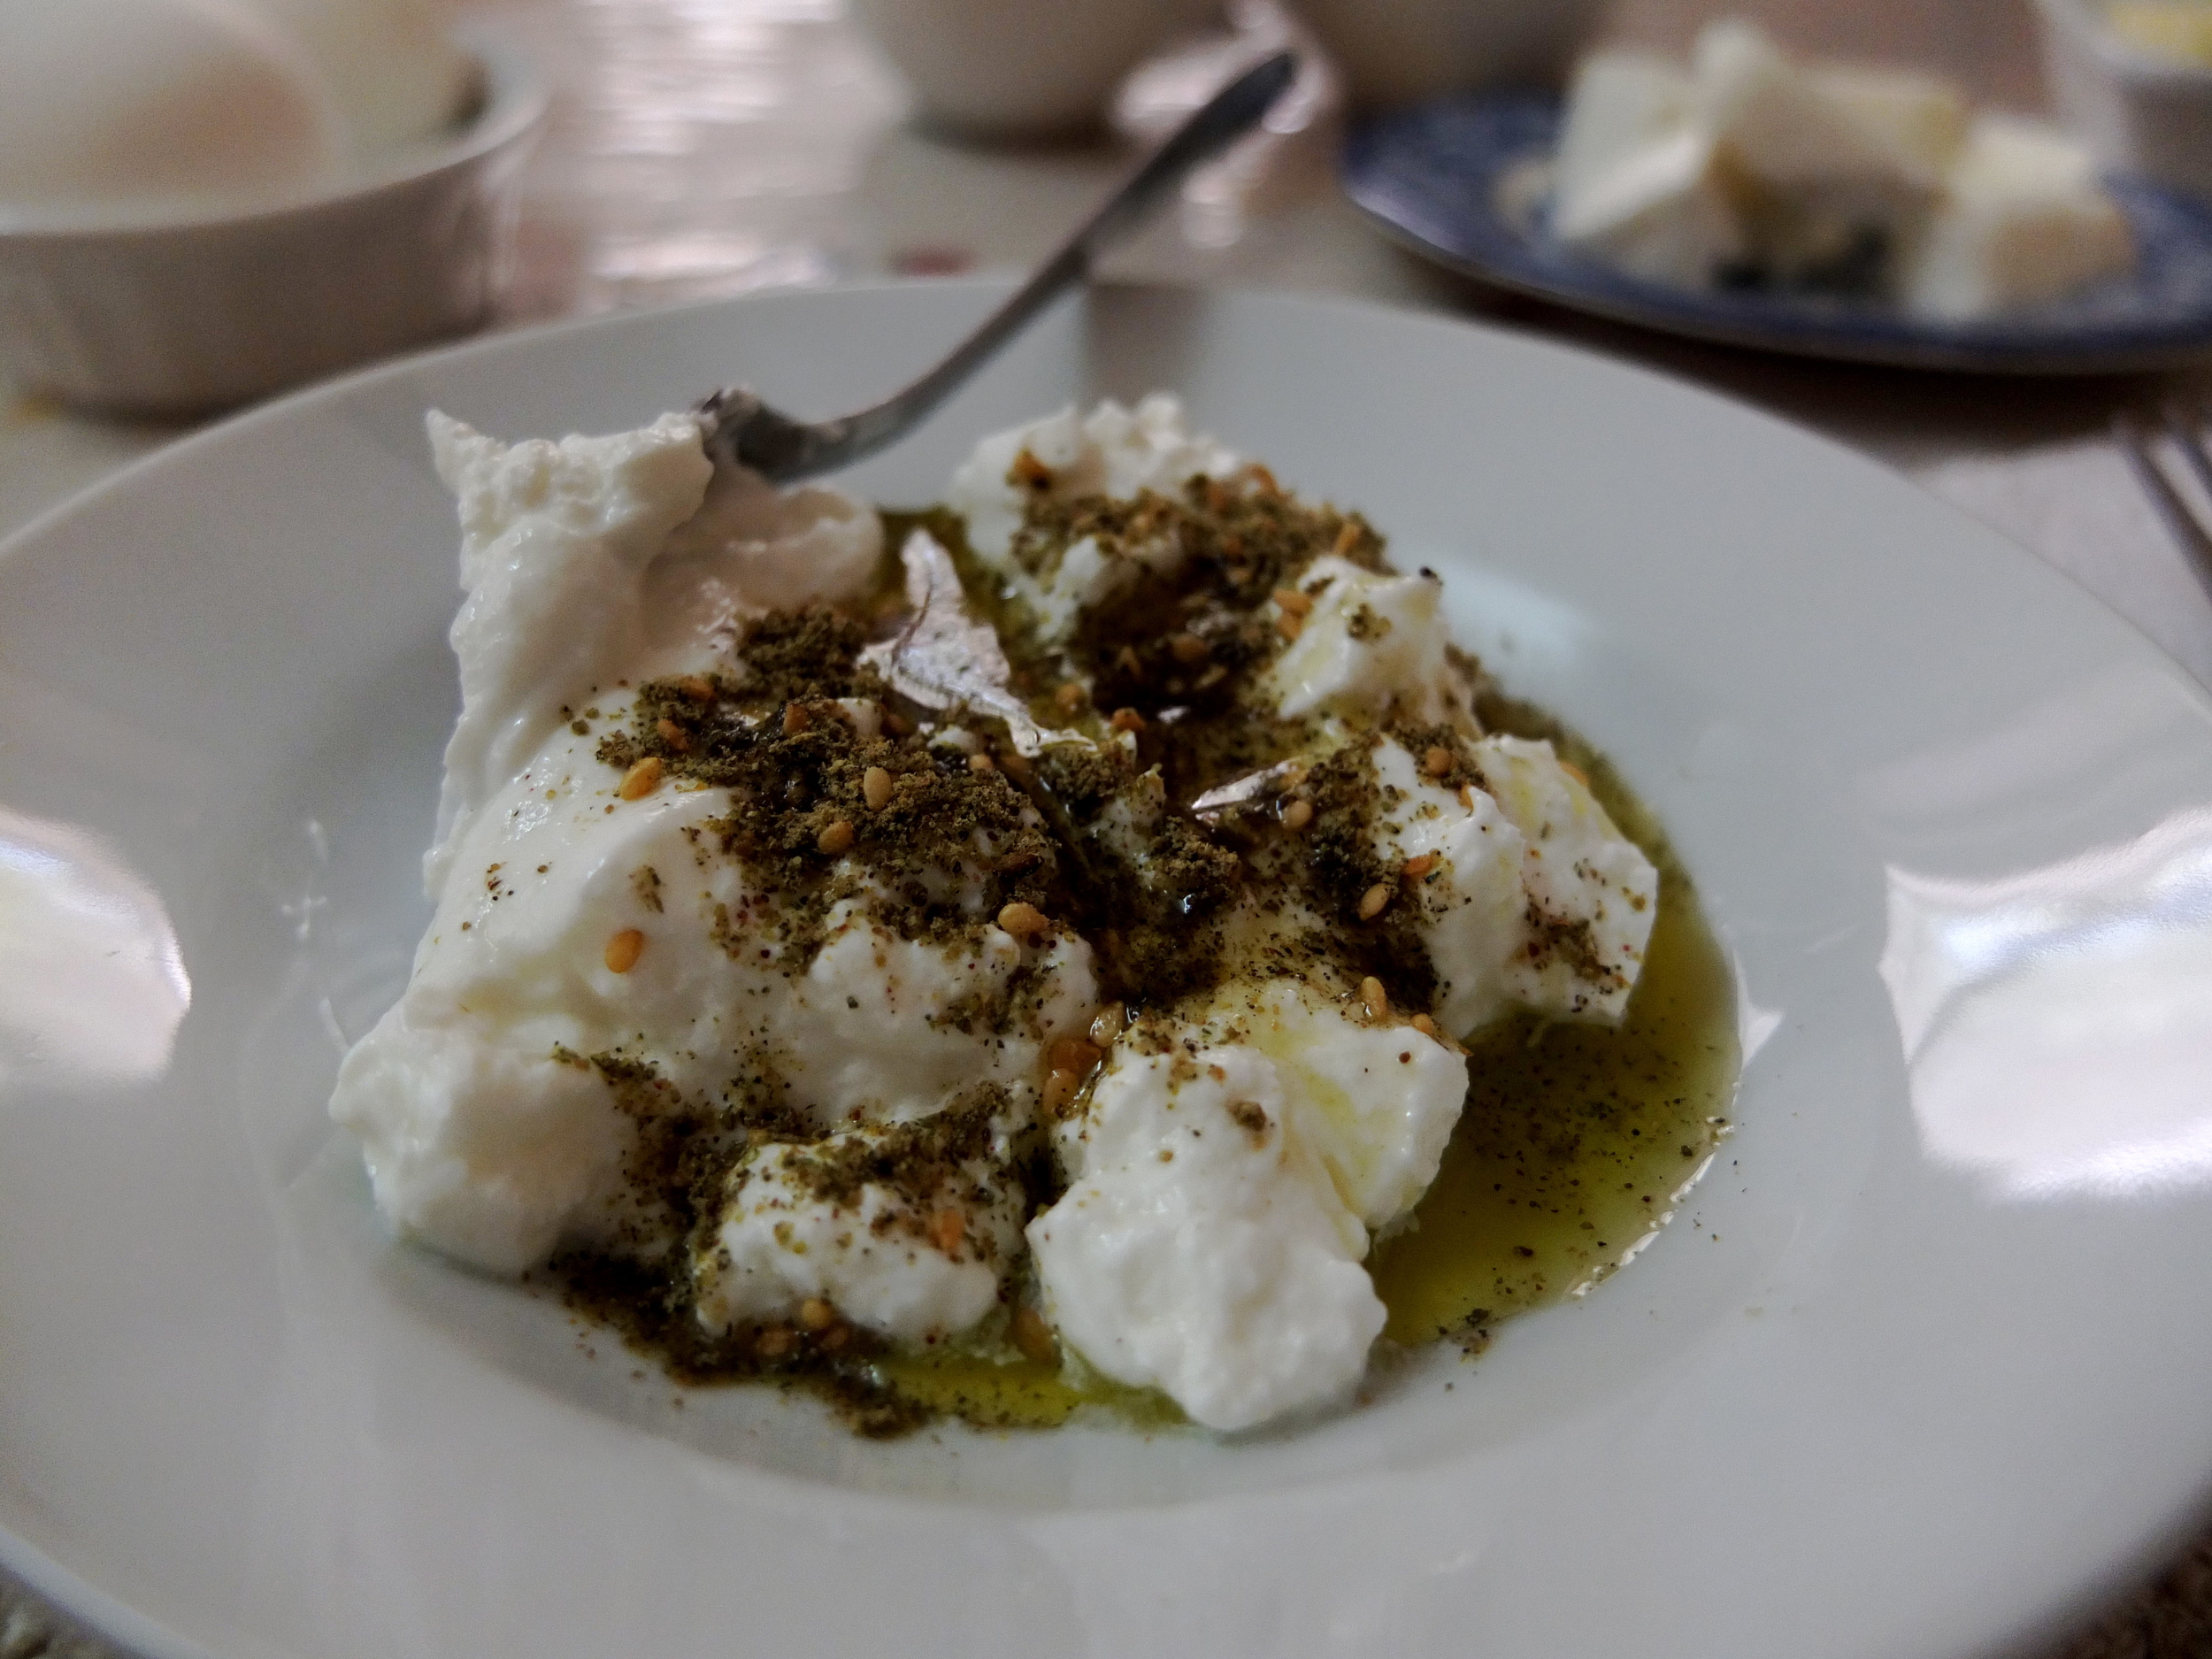    While I was in the Bethlehem area, I stayed with an elderly couple—Maryam and Karim—in nearby Beit Sahour. My first morning, I awoke to a gorgeous breakfast     spread laid out by Maryam: warm, fluffy bread; homemade apricot jam; a boiled egg;    